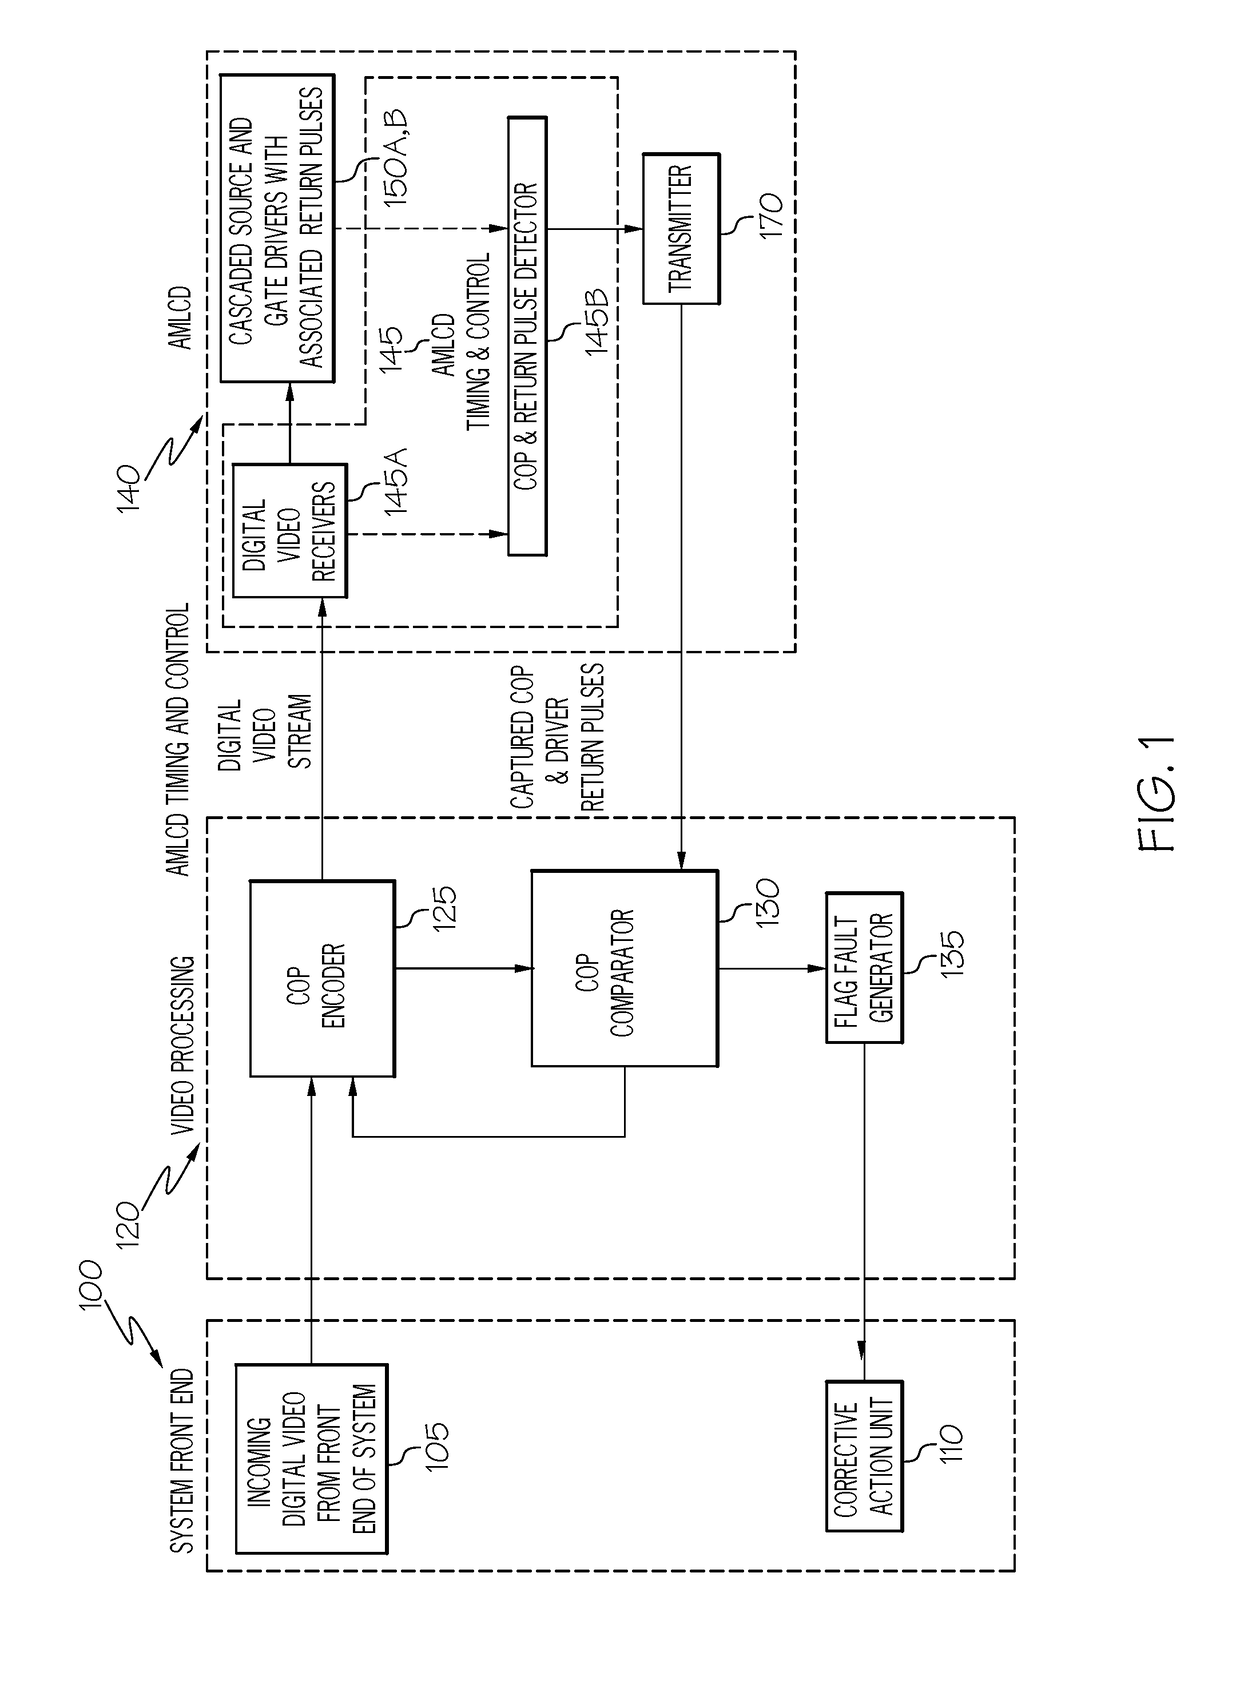 Fault detection for a display system